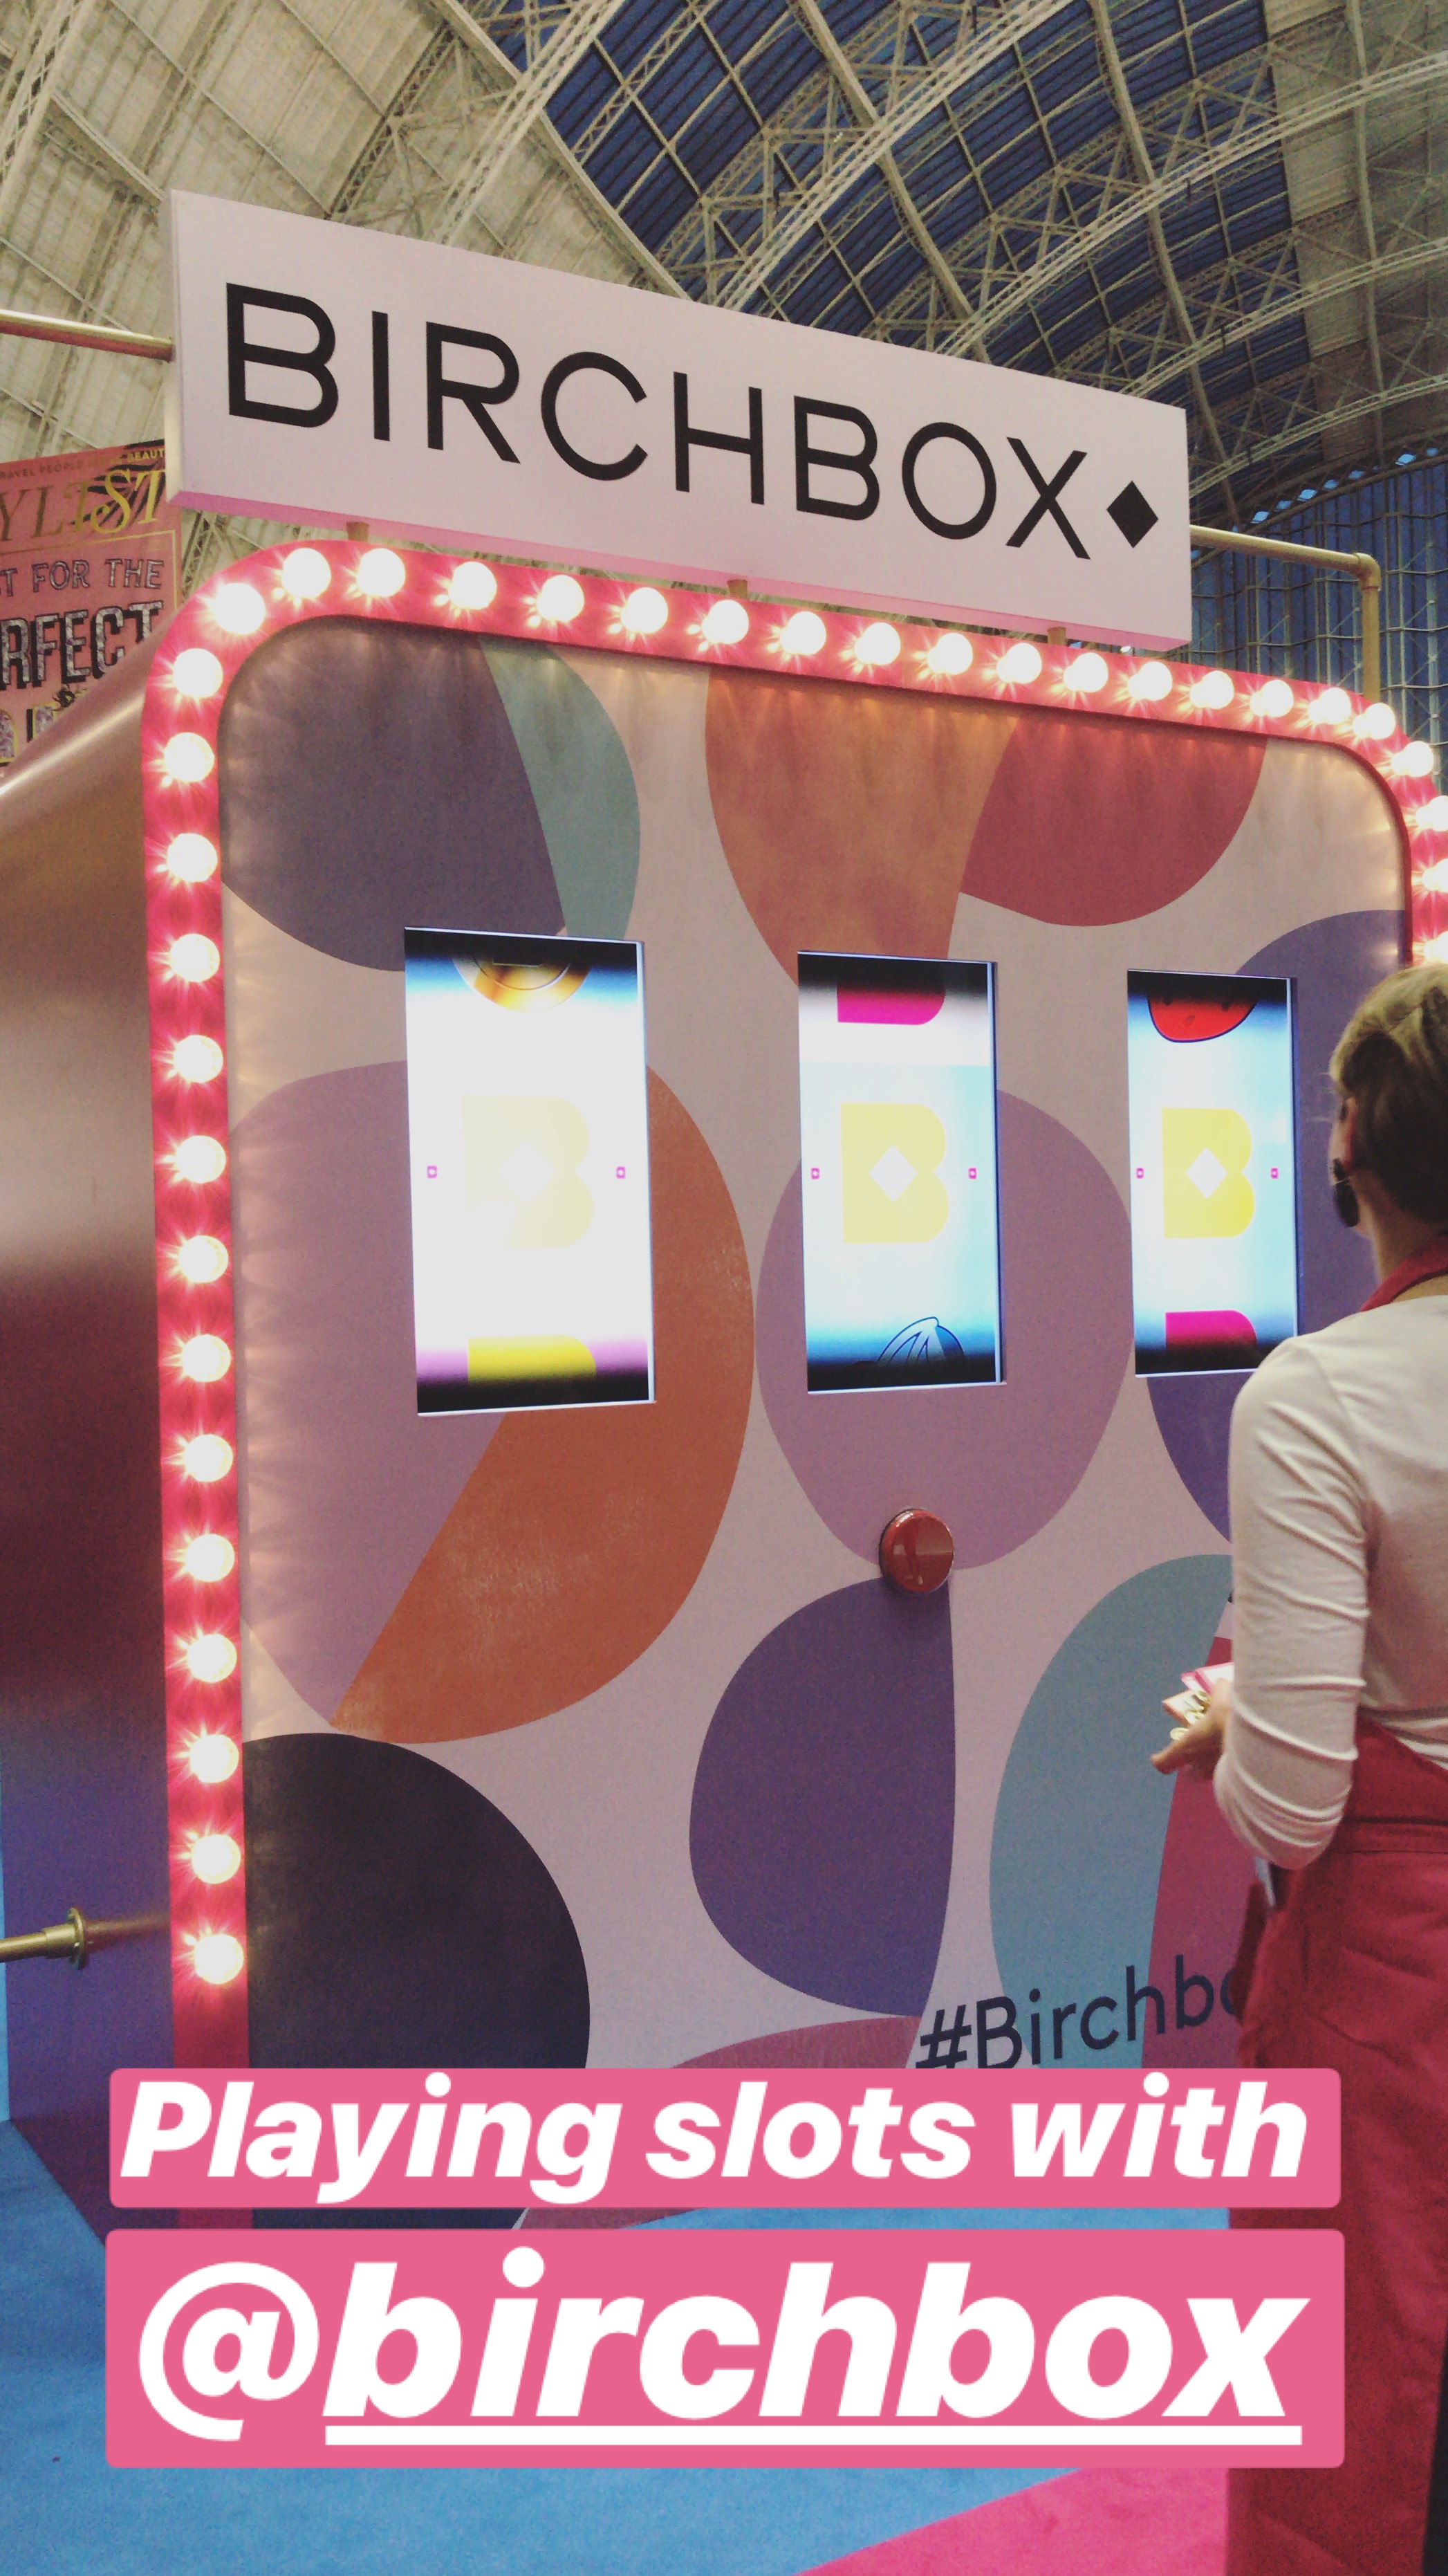 Birchbox were on site with their interactive slots game